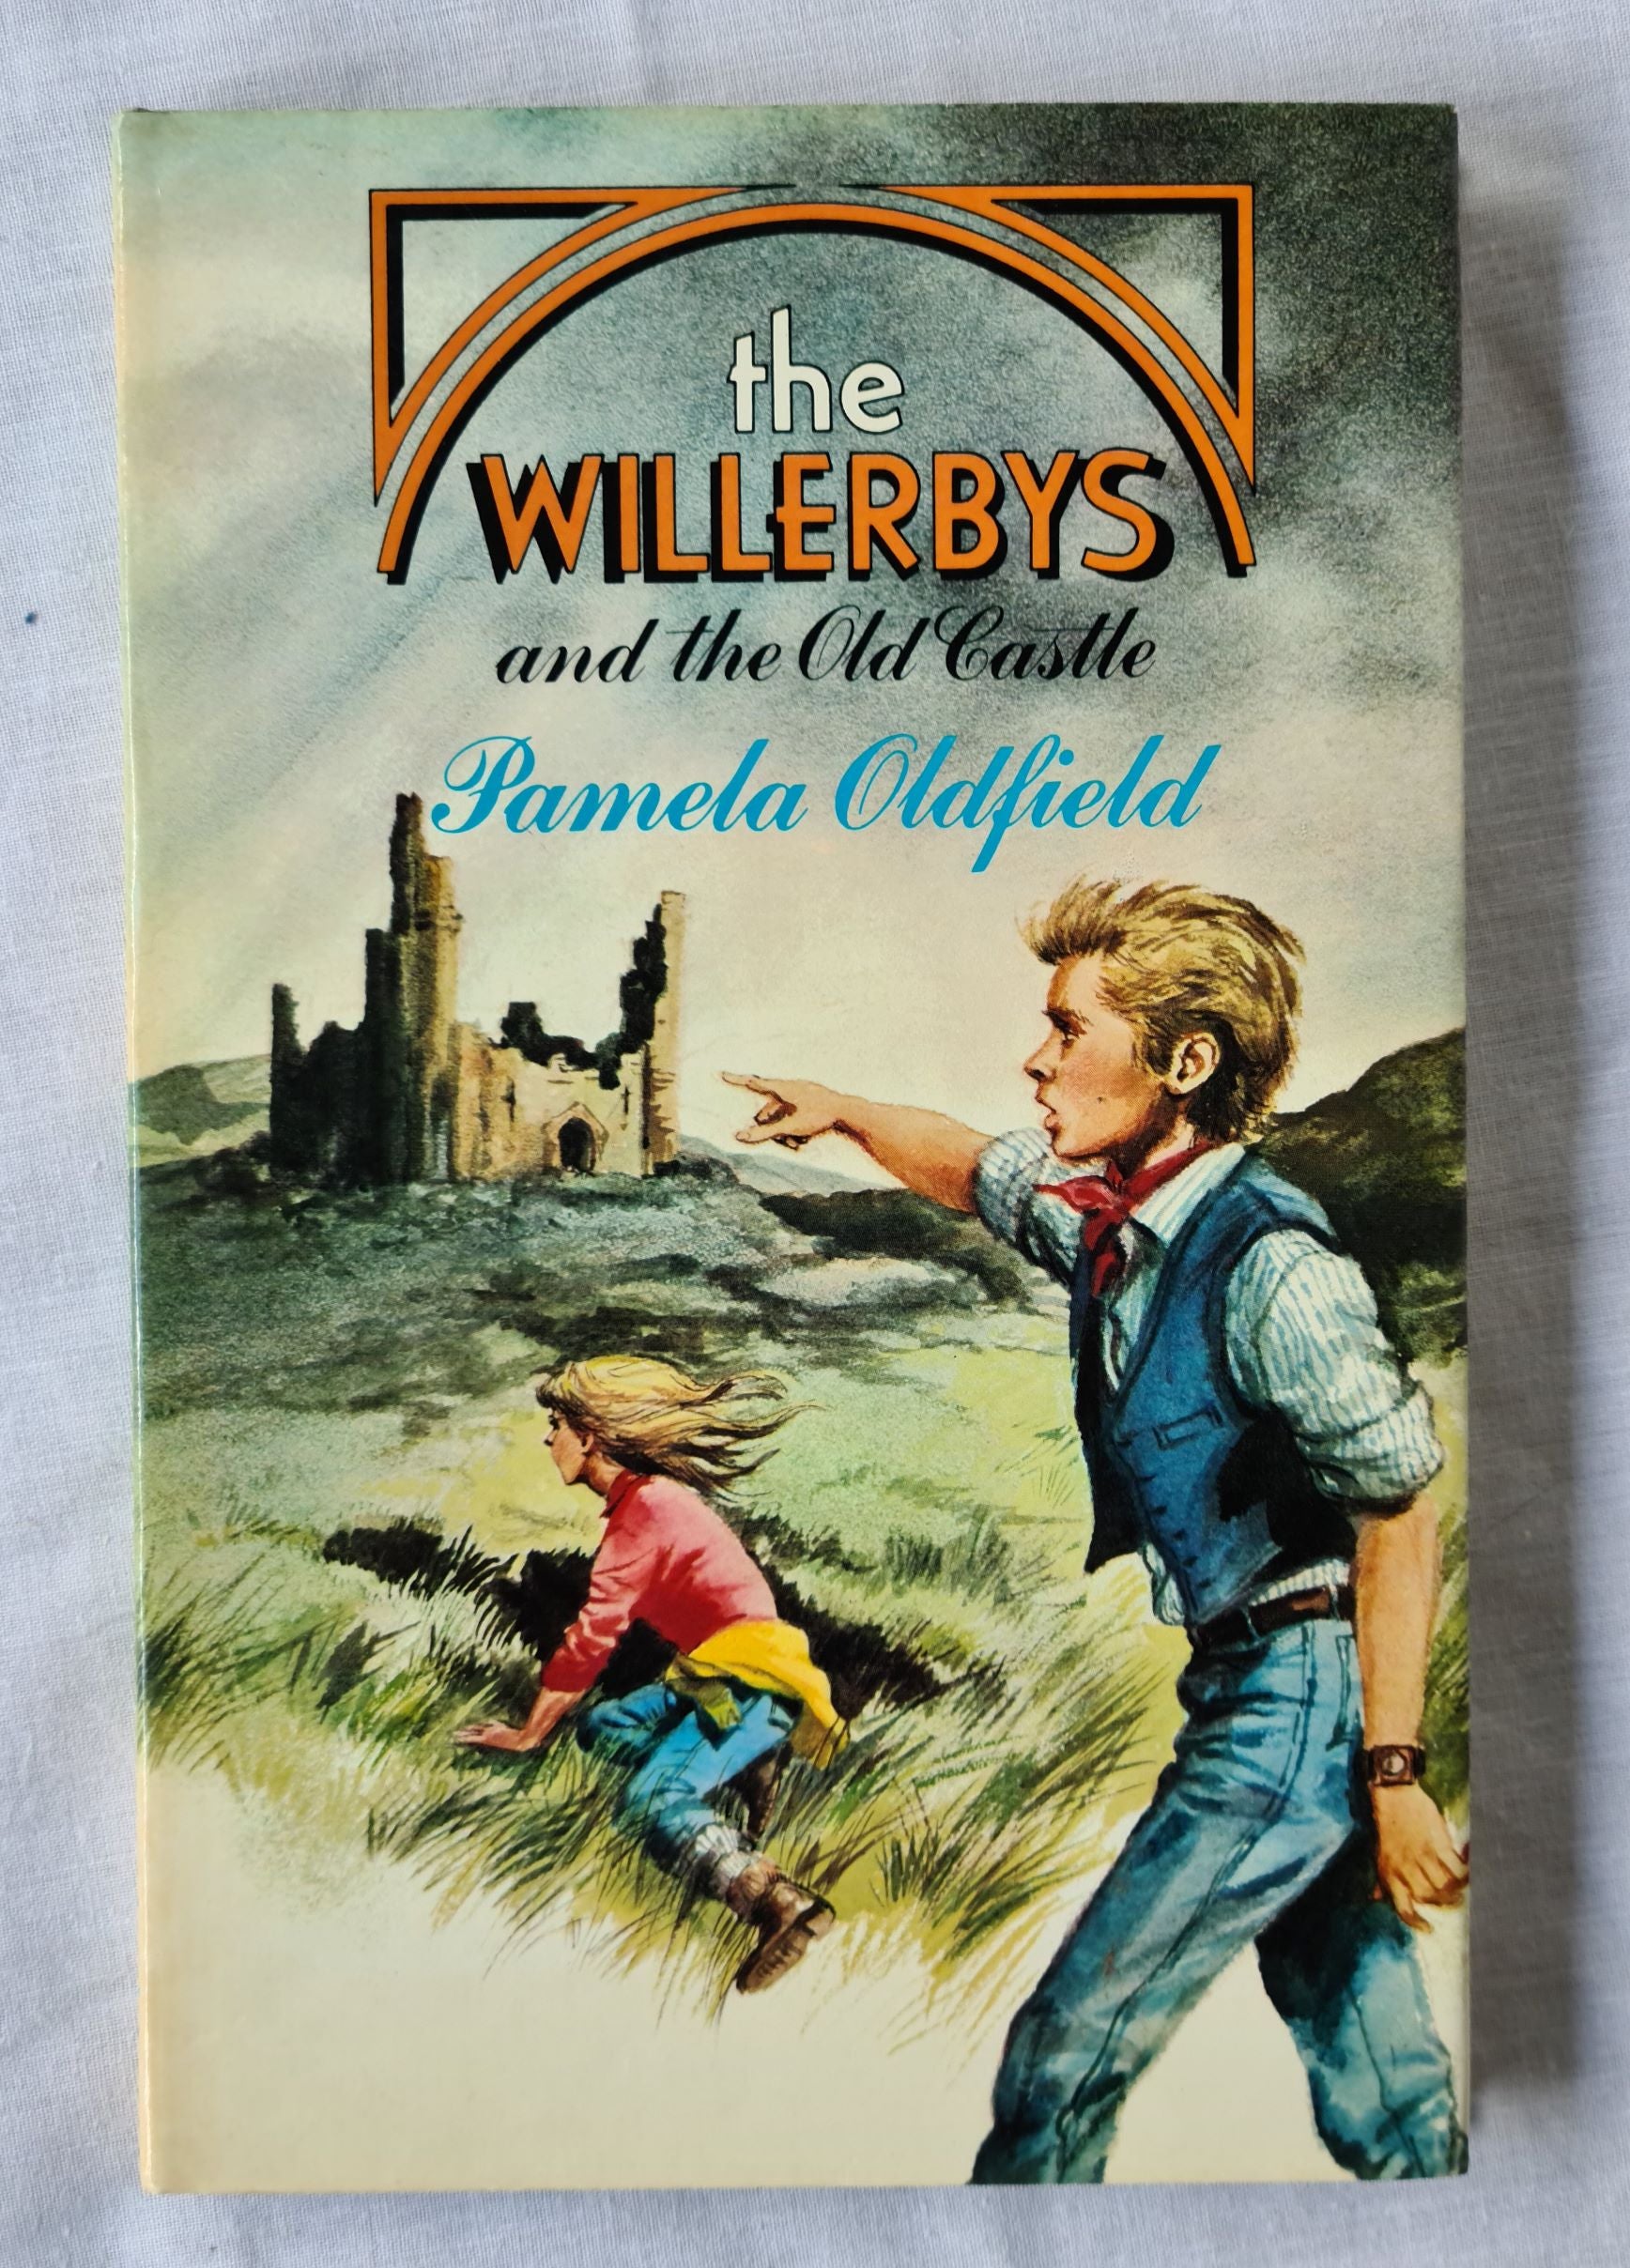 The Willerbys and the Old Castle  by Pamela Oldfield  Illustrated by Shirley Bellwood